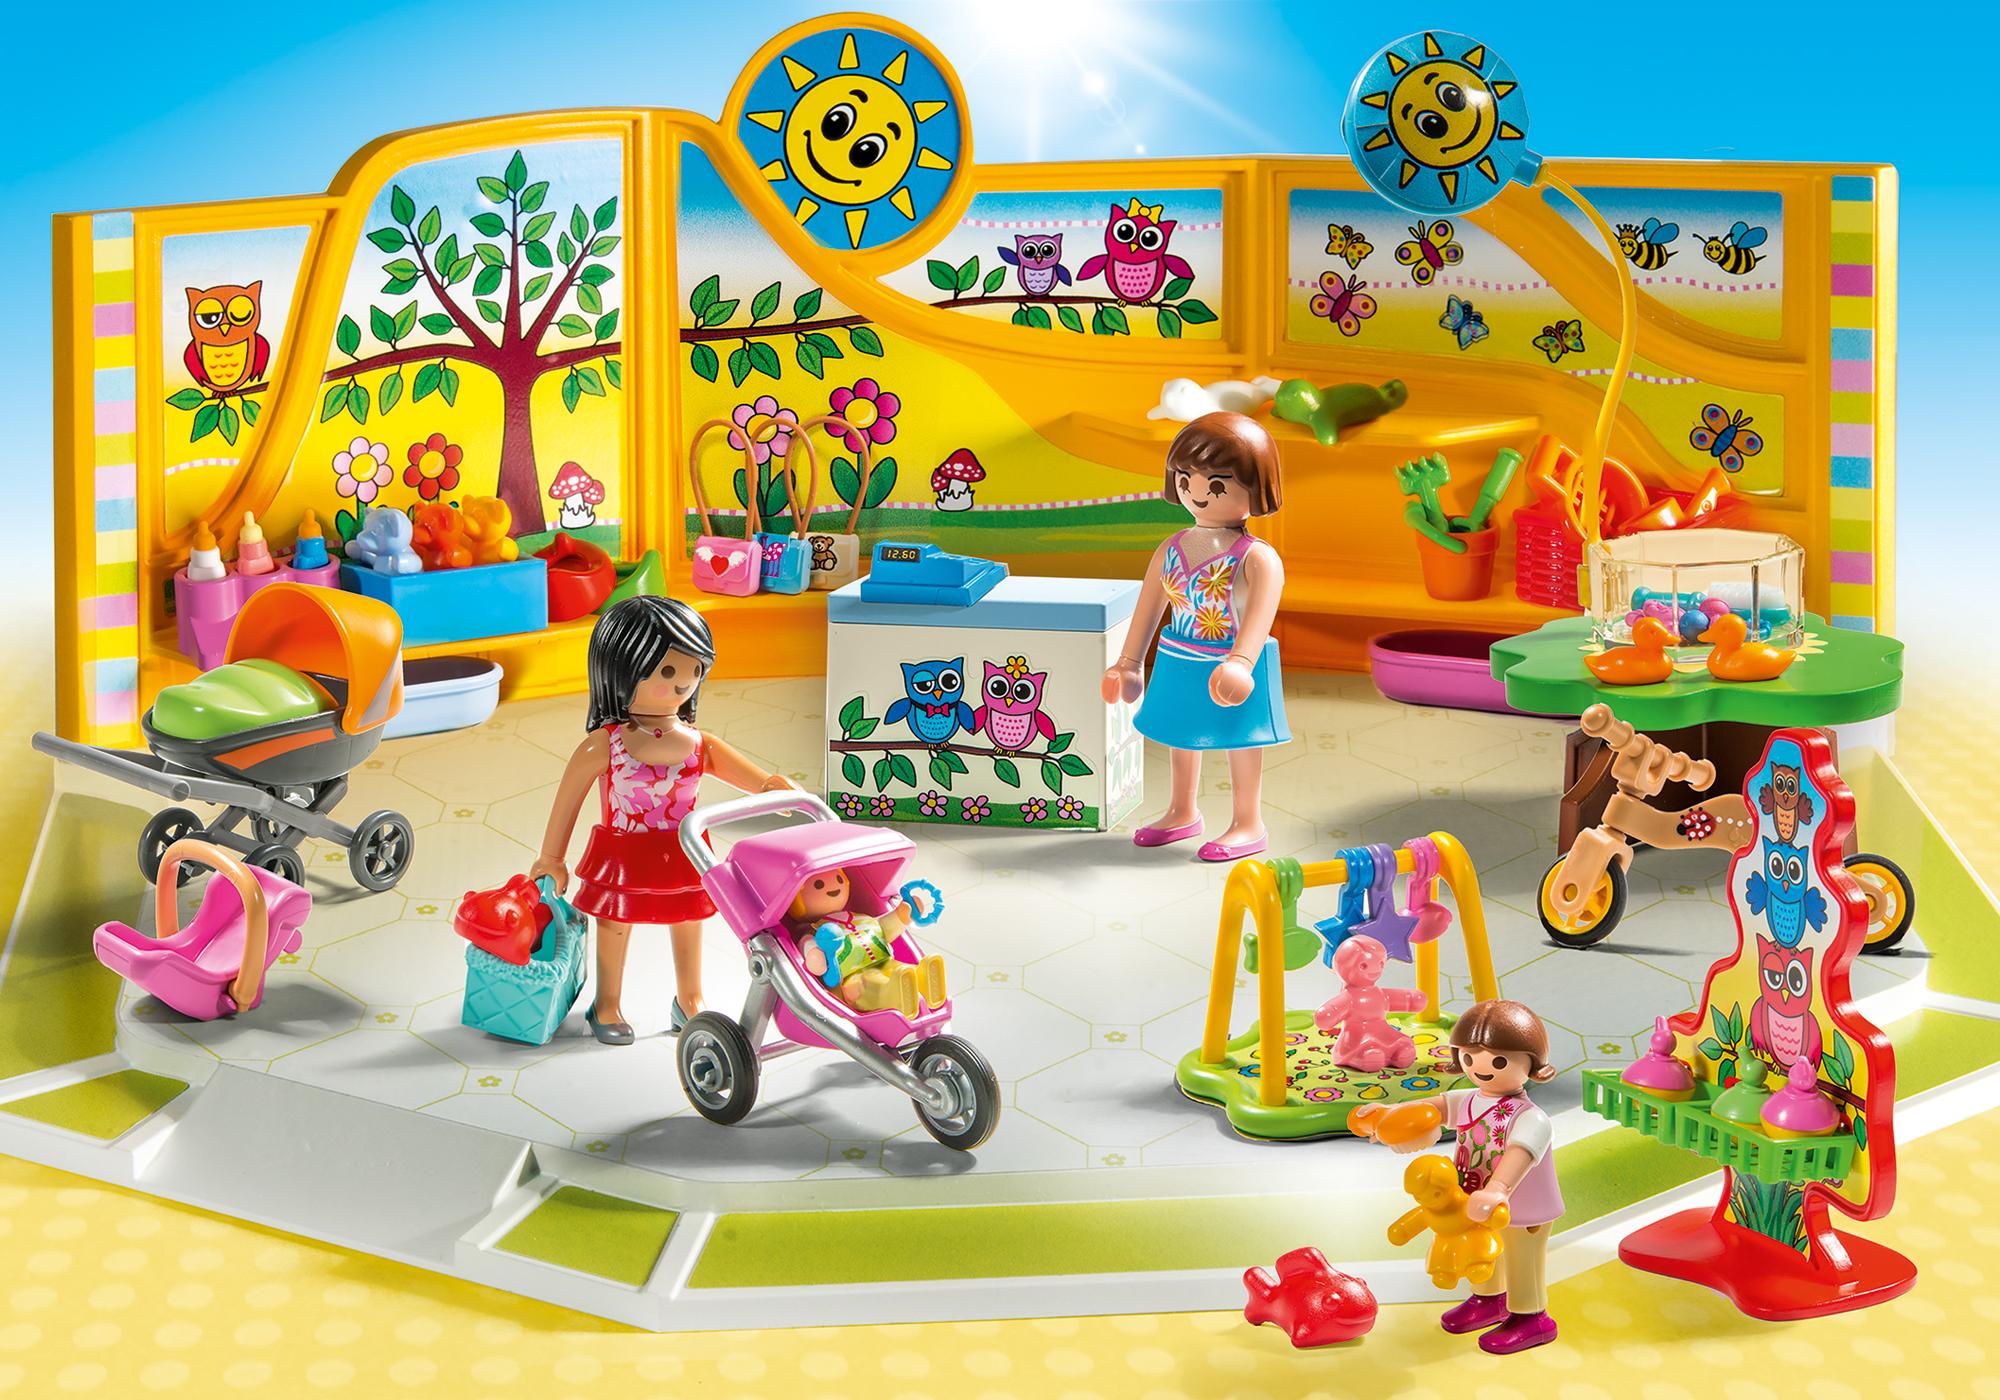 playmobil le magasin